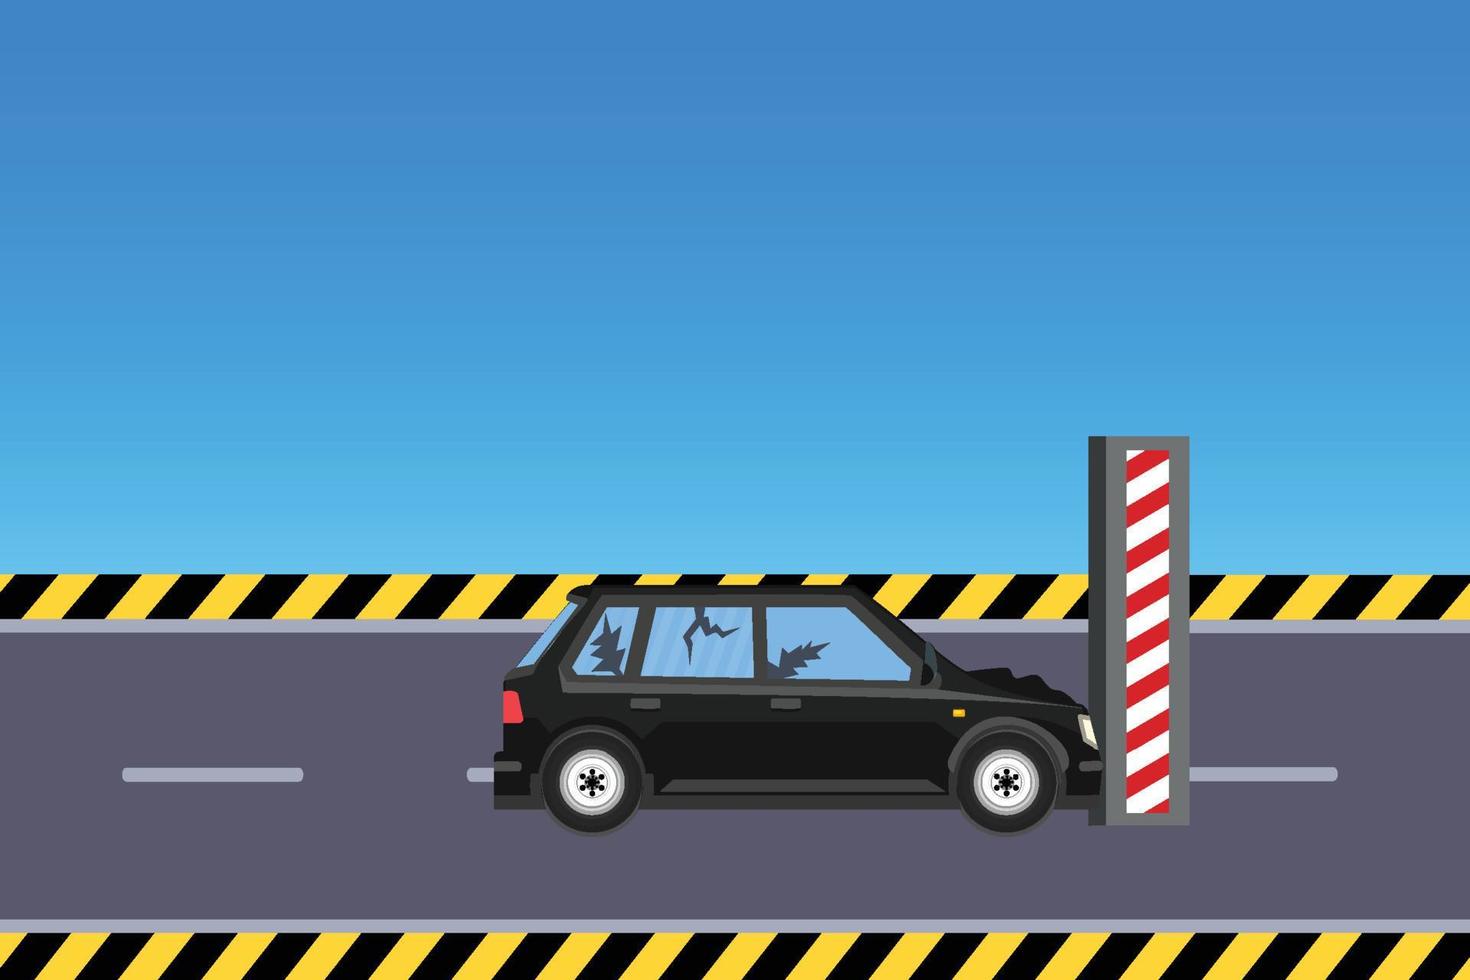 Car crash vector illustration in testing ground. A black car with broken windows and frames on an urban road. Car accidents and collation illustration with an iron test bar vector.